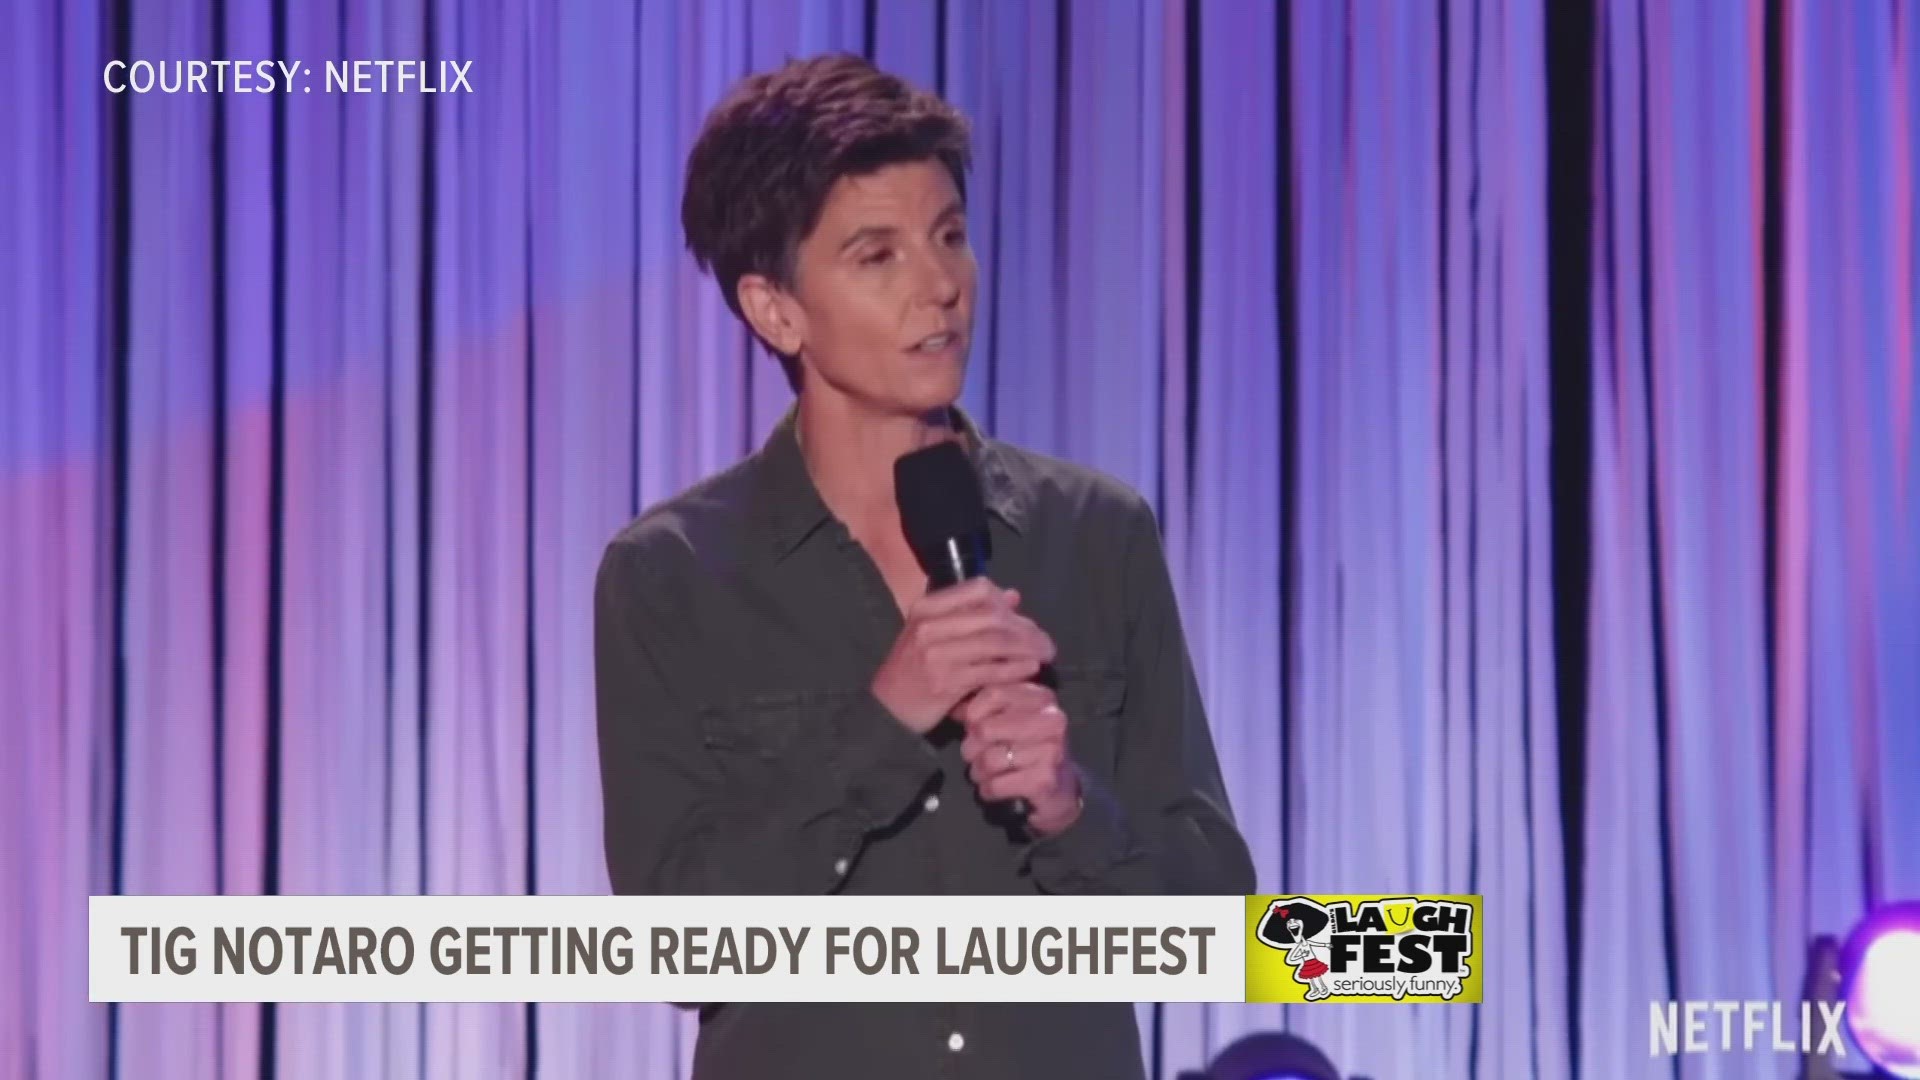 Tig Notaro will be performing alongside comedians like Pete Homes, Daphnique Springs and more for LaughFest.